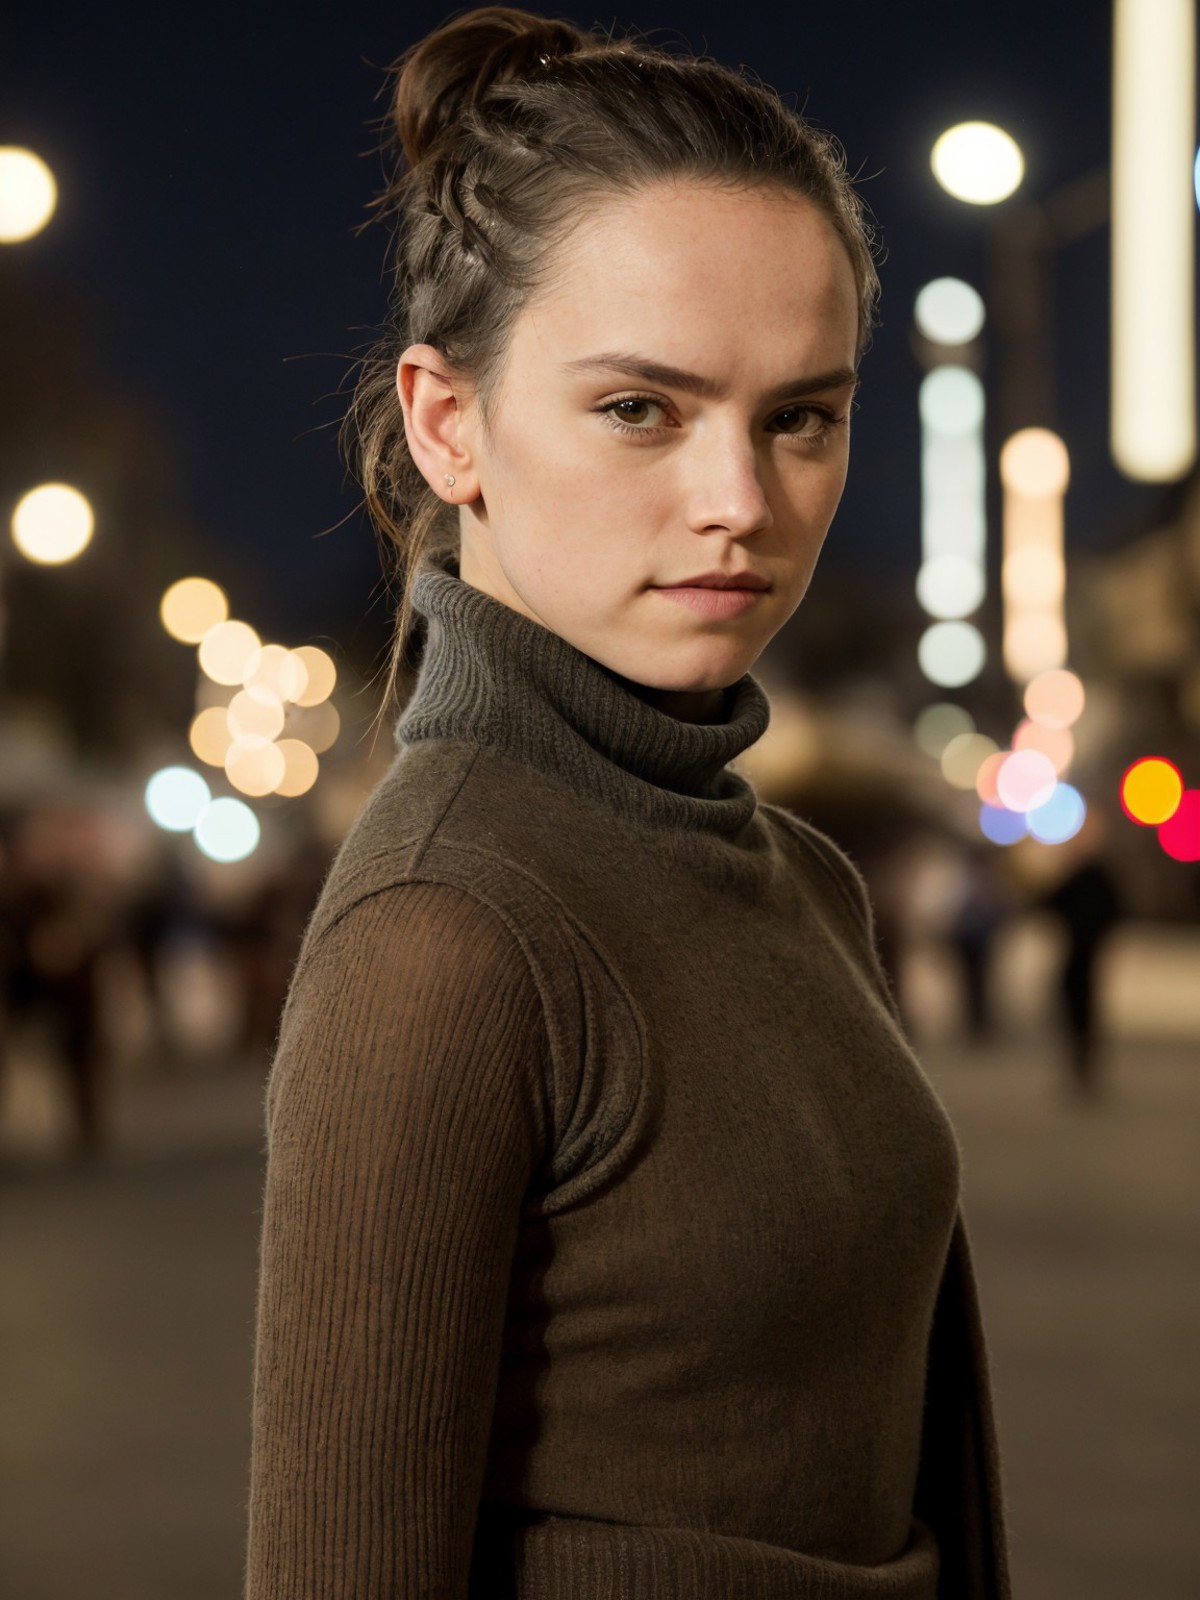 Daisy Ridley image by damocles_aaa